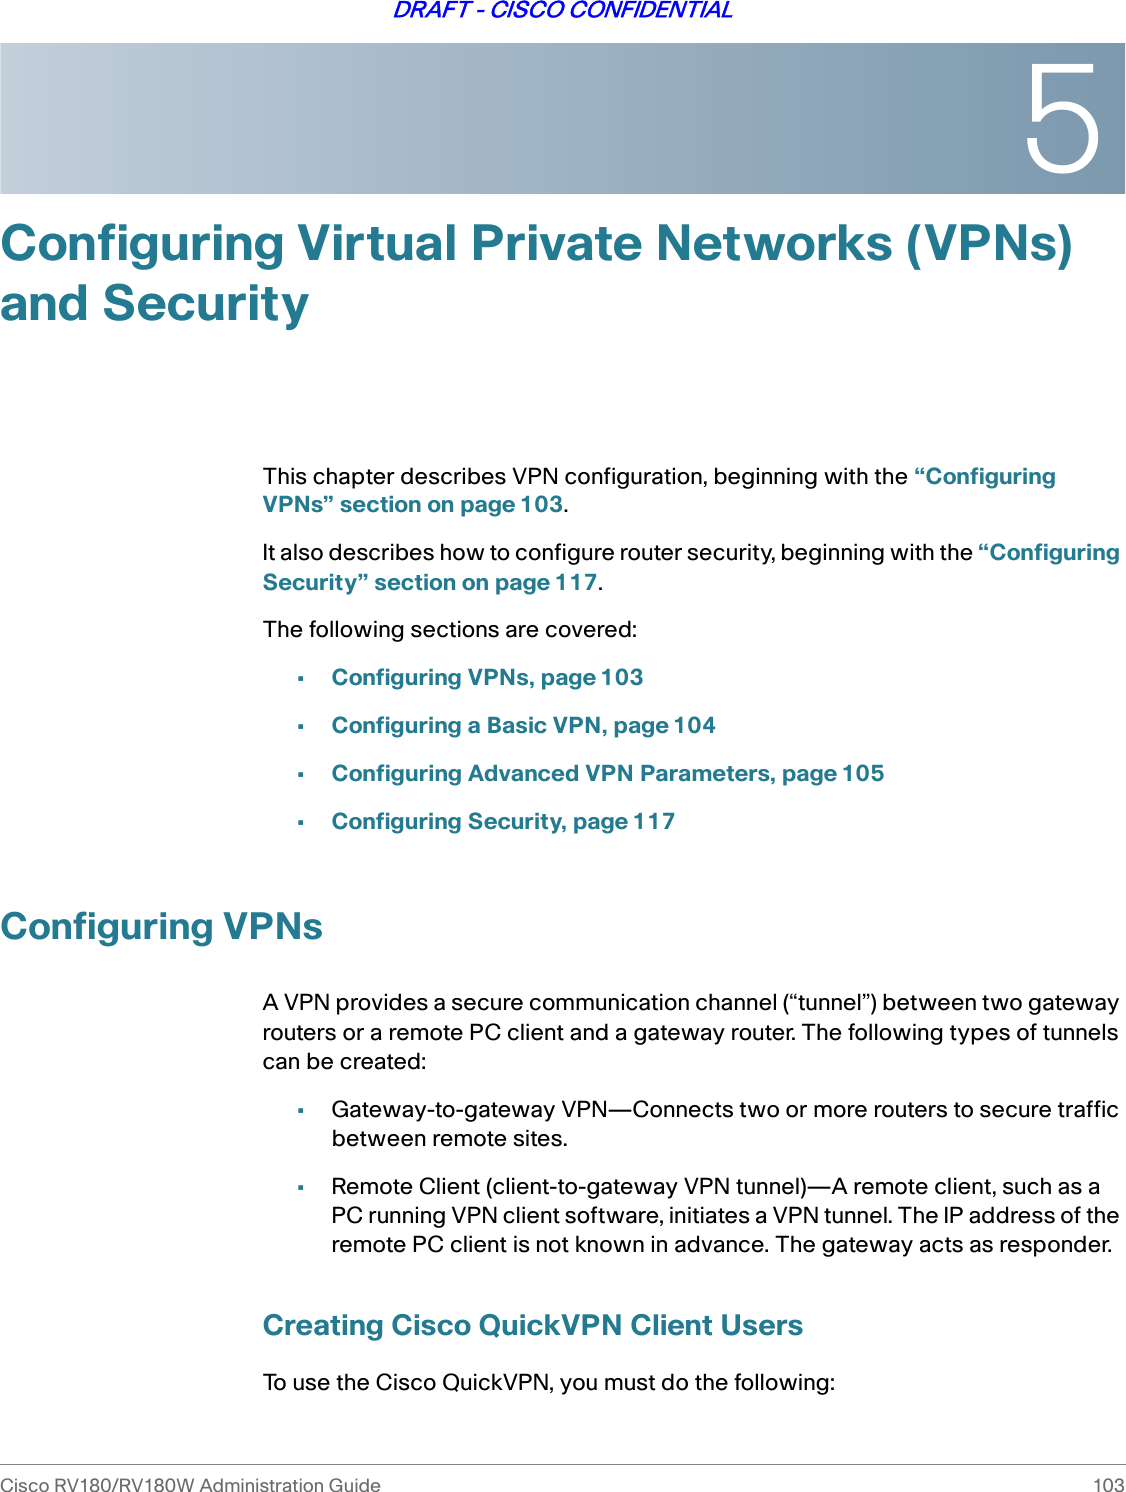 5Cisco RV180/RV180W Administration Guide 103DRAFT - CISCO CONFIDENTIALConfiguring Virtual Private Networks (VPNs) and SecurityThis chapter describes VPN configuration, beginning with the “Configuring VPNs” section on page 103.It also describes how to configure router security, beginning with the “Configuring Security” section on page 117.The following sections are covered:•Configuring VPNs, page 103•Configuring a Basic VPN, page 104•Configuring Advanced VPN Parameters, page 105•Configuring Security, page 117Configuring VPNsA VPN provides a secure communication channel (“tunnel”) between two gateway routers or a remote PC client and a gateway router. The following types of tunnels can be created:•Gateway-to-gateway VPN—Connects two or more routers to secure traffic between remote sites. •Remote Client (client-to-gateway VPN tunnel)—A remote client, such as a PC running VPN client software, initiates a VPN tunnel. The IP address of the remote PC client is not known in advance. The gateway acts as responder.Creating Cisco QuickVPN Client UsersTo use the Cisco QuickVPN, you must do the following: